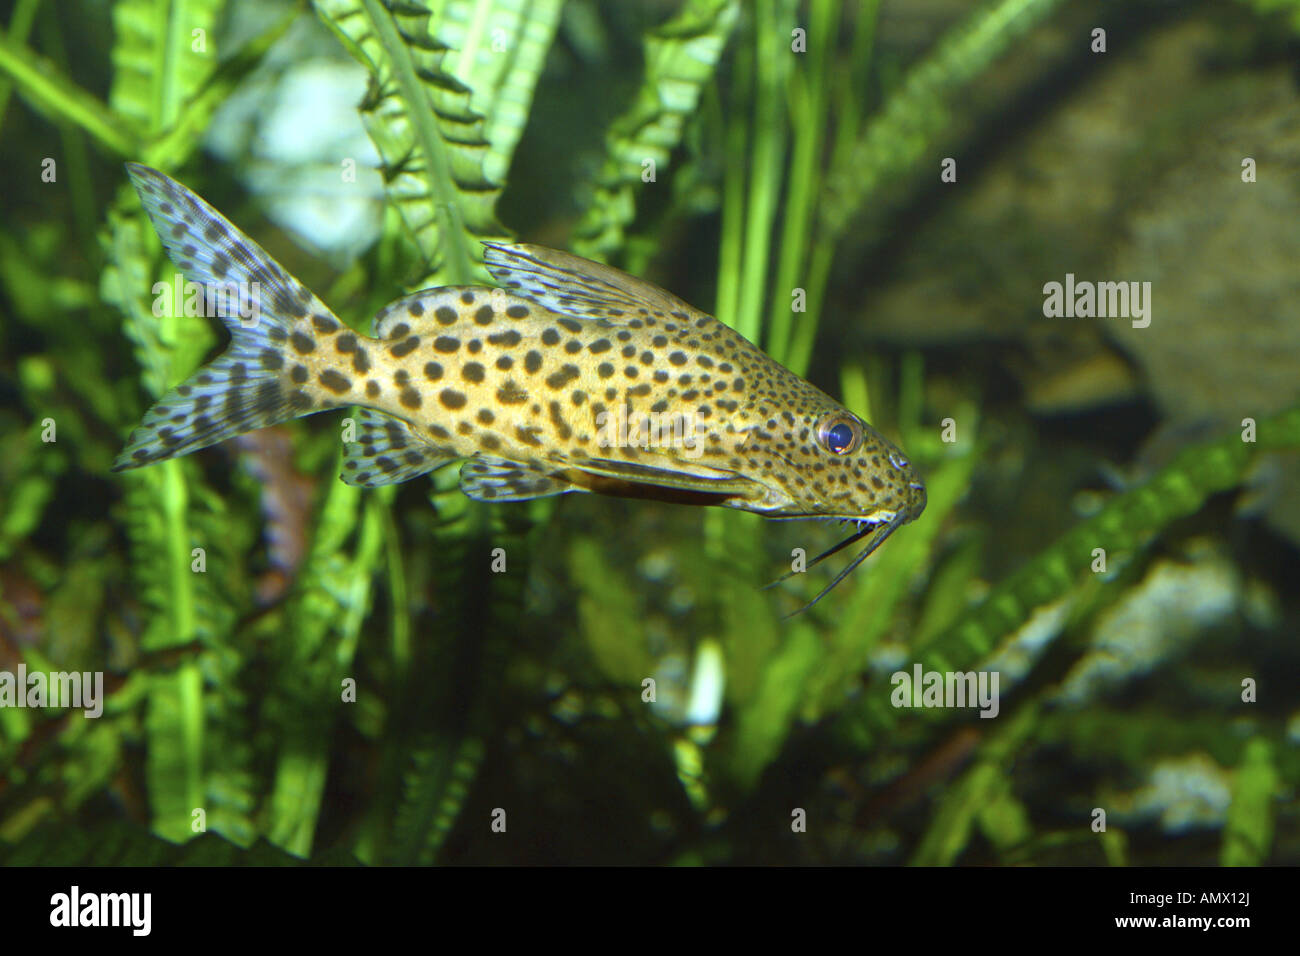 polka-dot African catfish, angel squeaker (Synodontis angelicus), in front of water plants Stock Photo